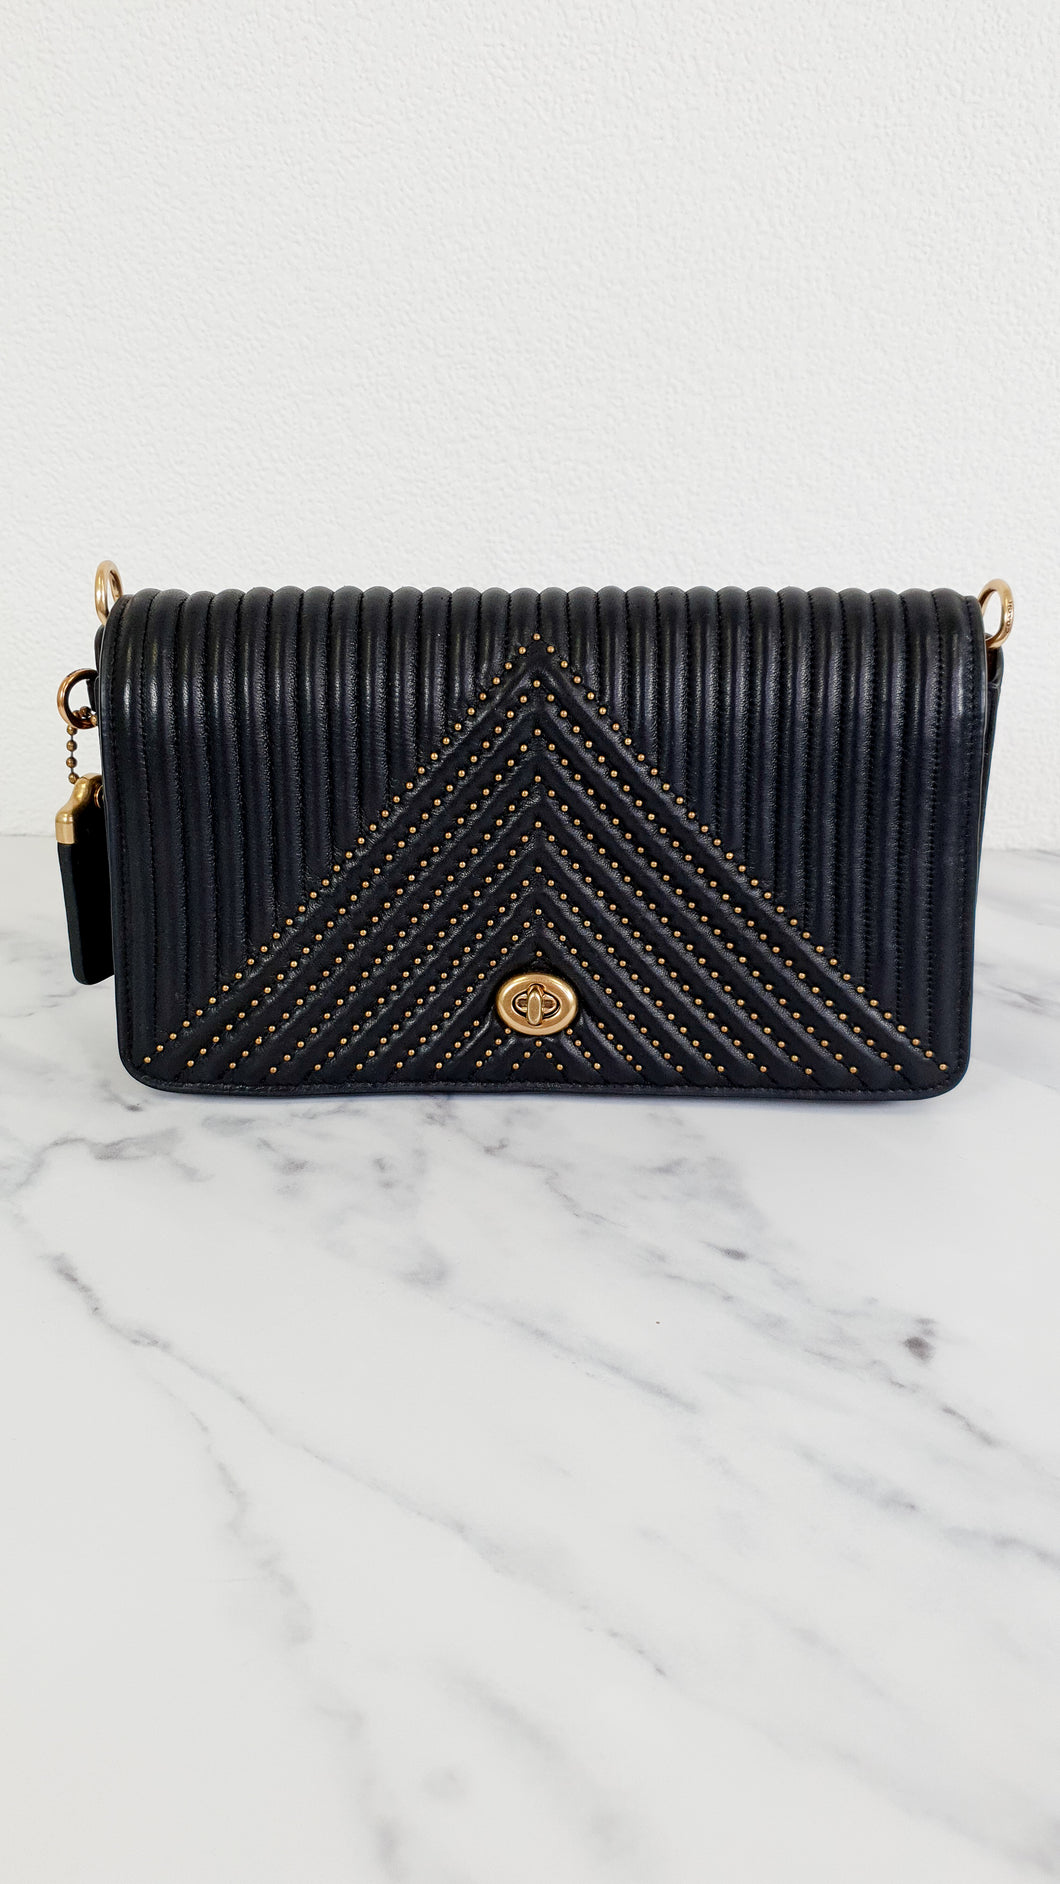 Coach 1941 Dinky Crossbody Bag in Black Smooth Quilted Nappa Leather Chevrons Rivets- Coach 22789